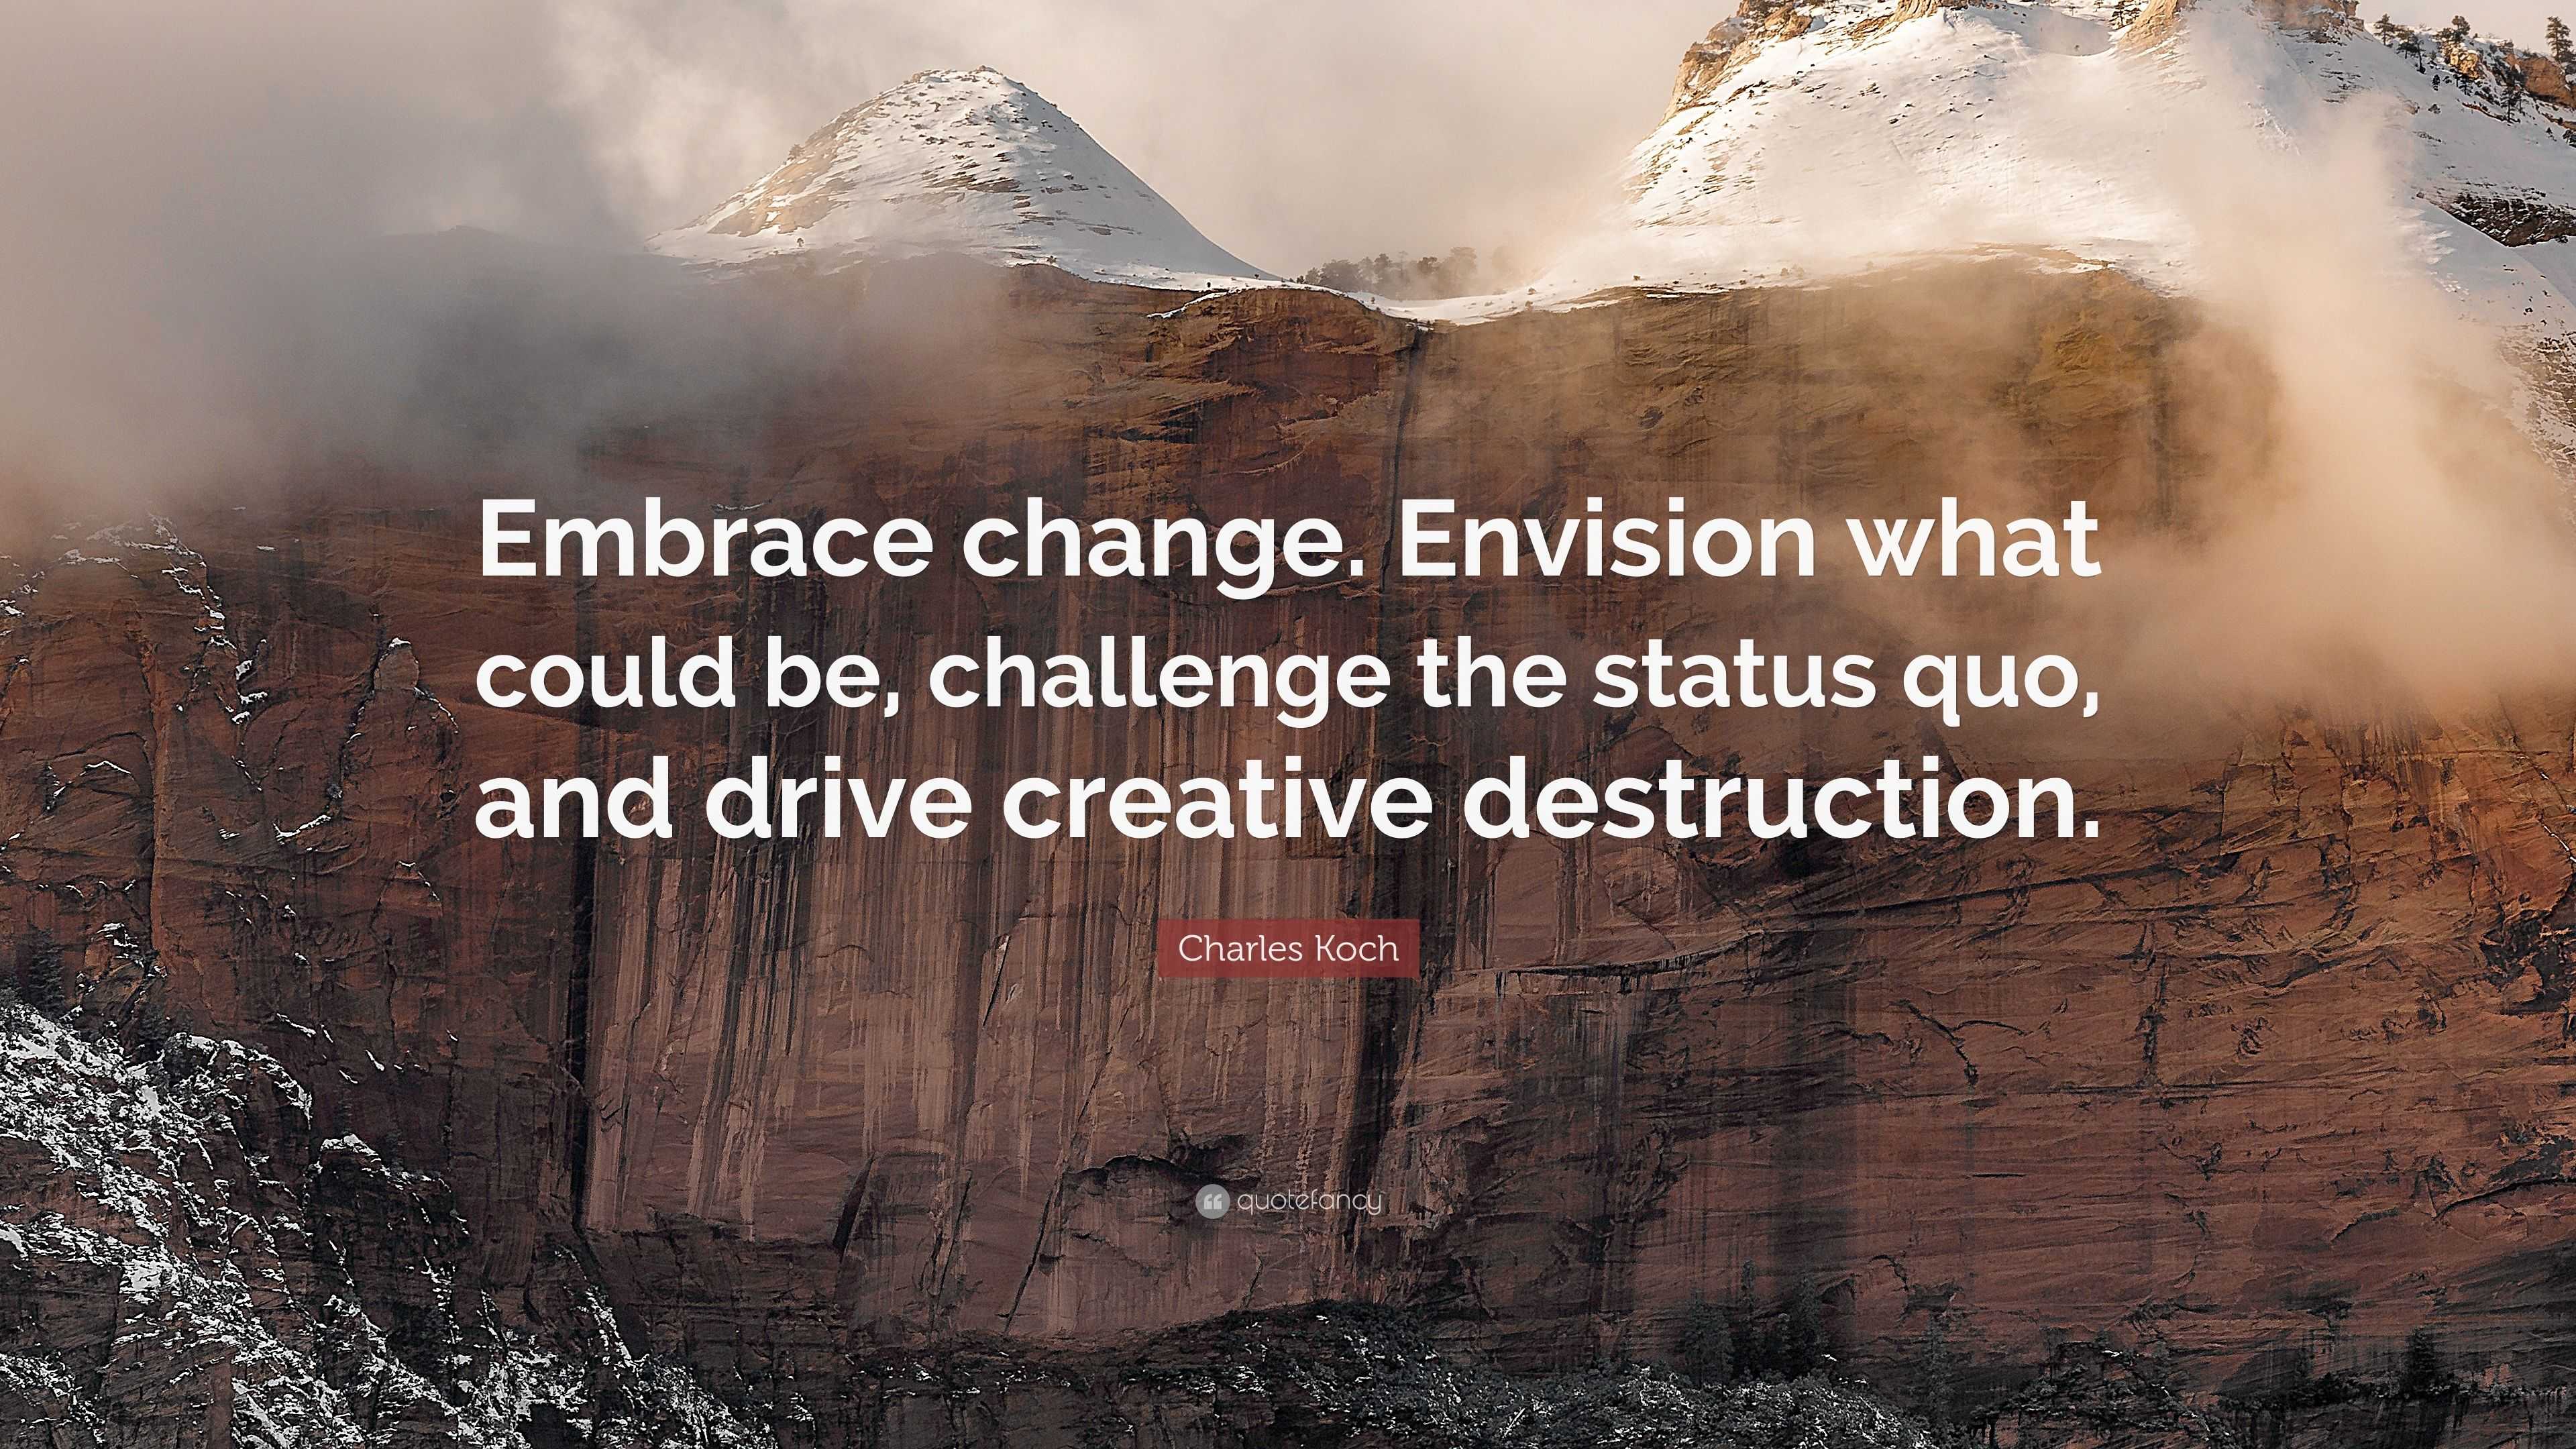 Charles Koch Quote: “Embrace change. Envision what could be, challenge ...